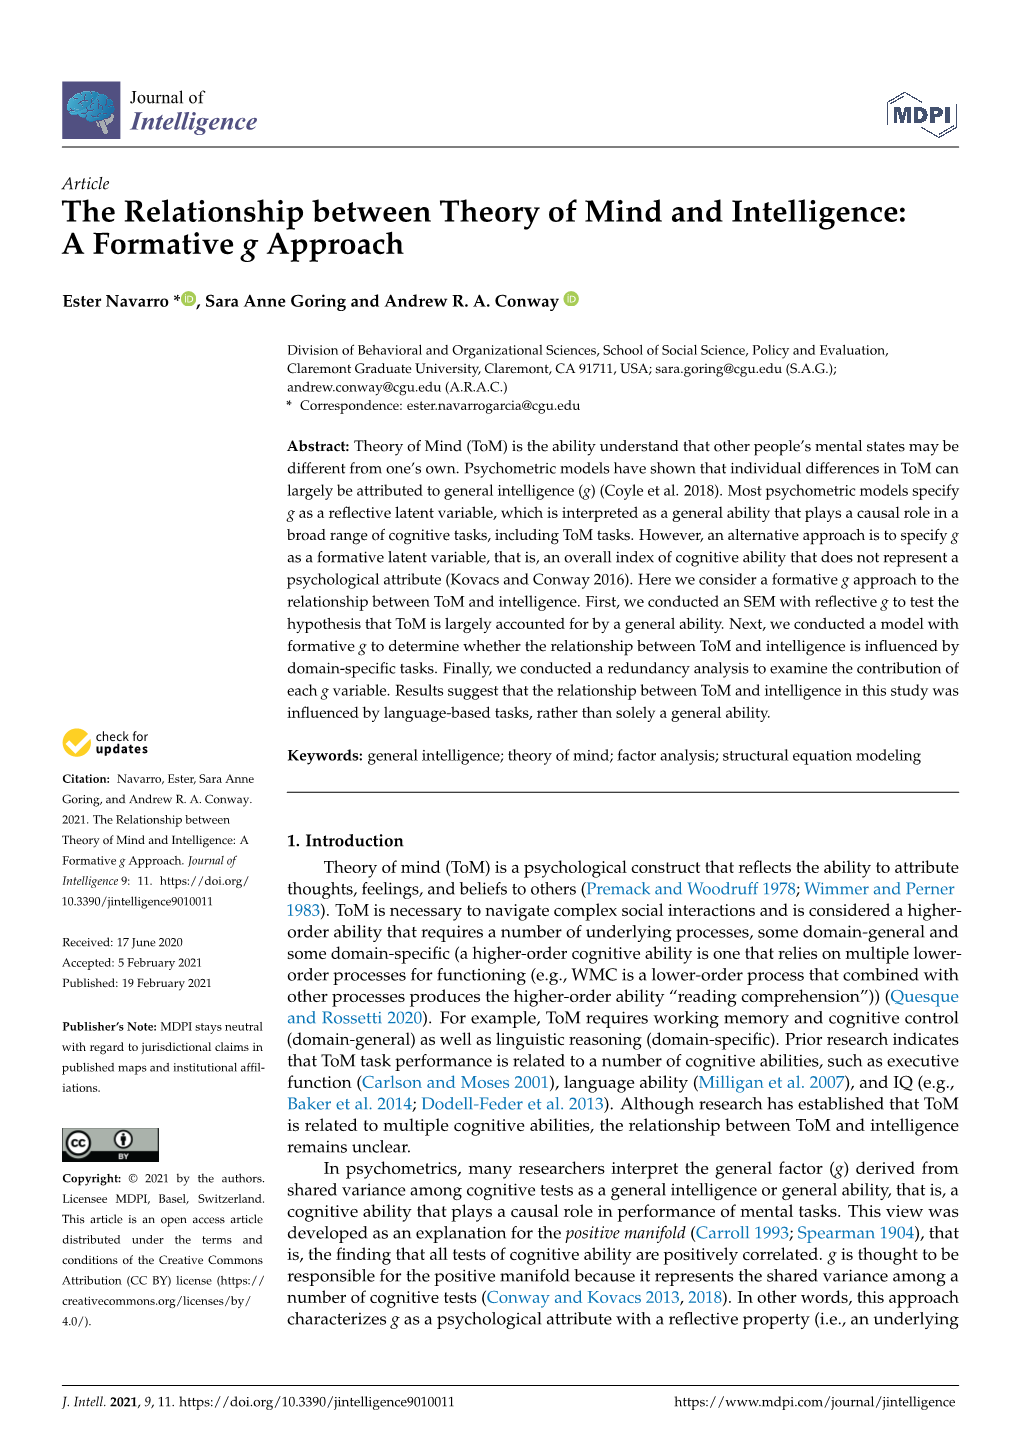 The Relationship Between Theory of Mind and Intelligence: a Formative G Approach